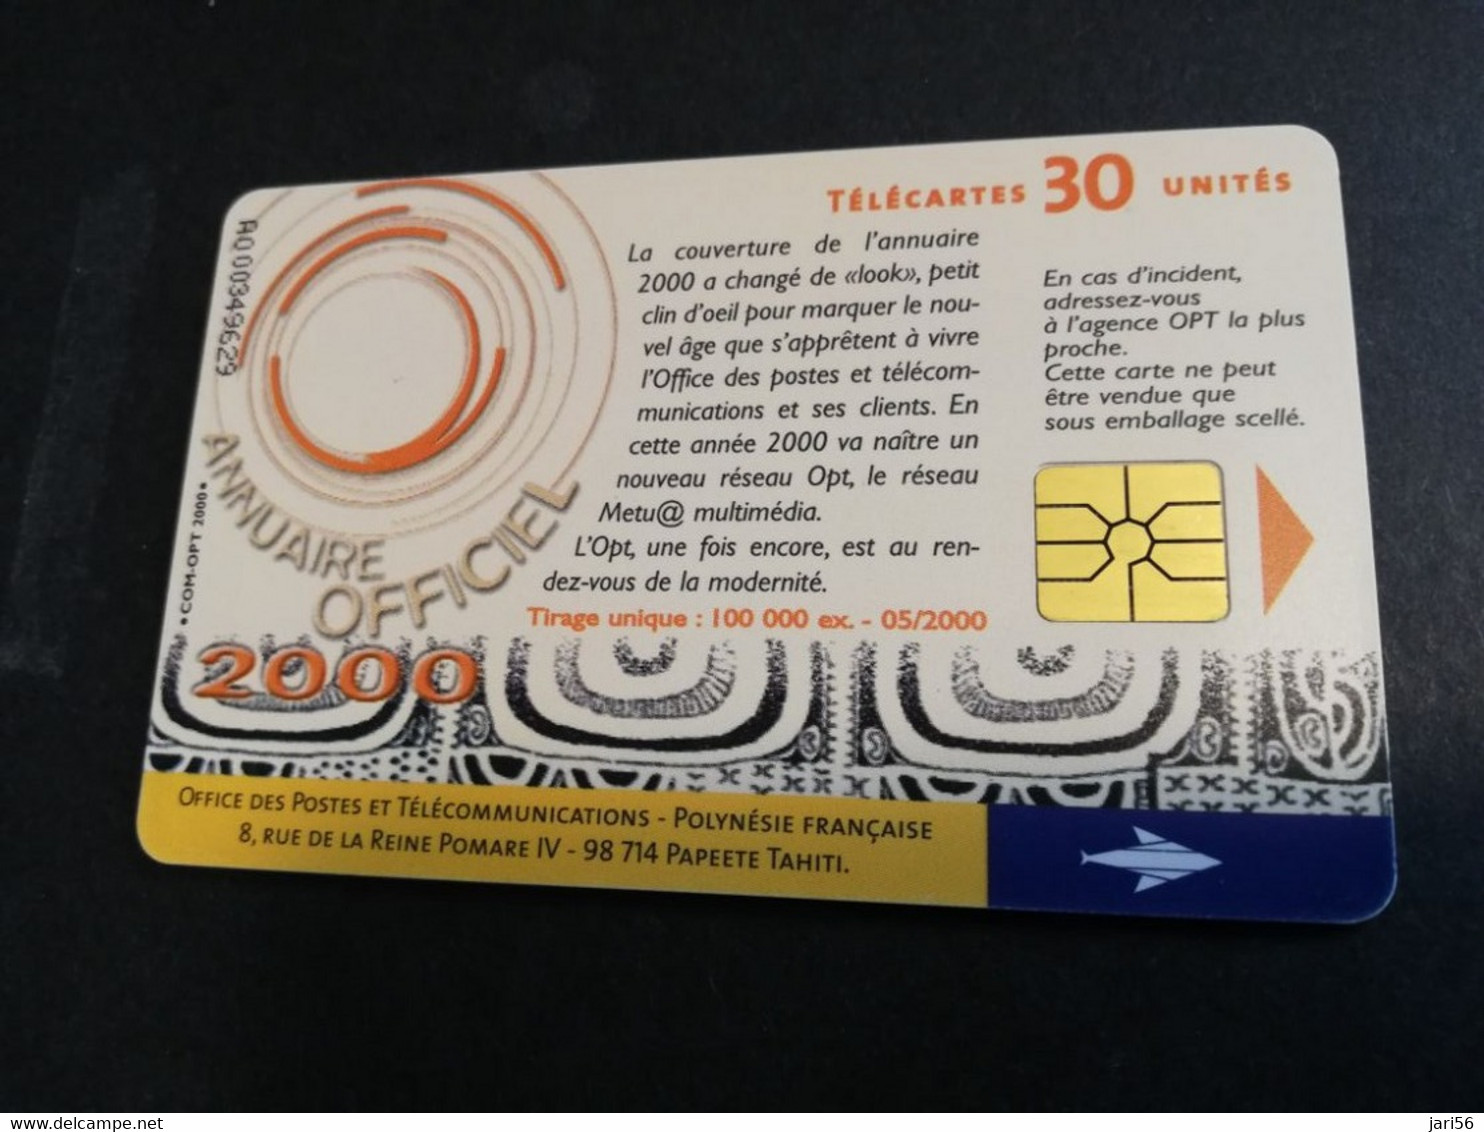 POLINESIA FRANCAISE  CHIPCARD  30 UNITS  ANNUAIRE OFFICIEL 2000    POLYNESIEN                **4954** - French Polynesia